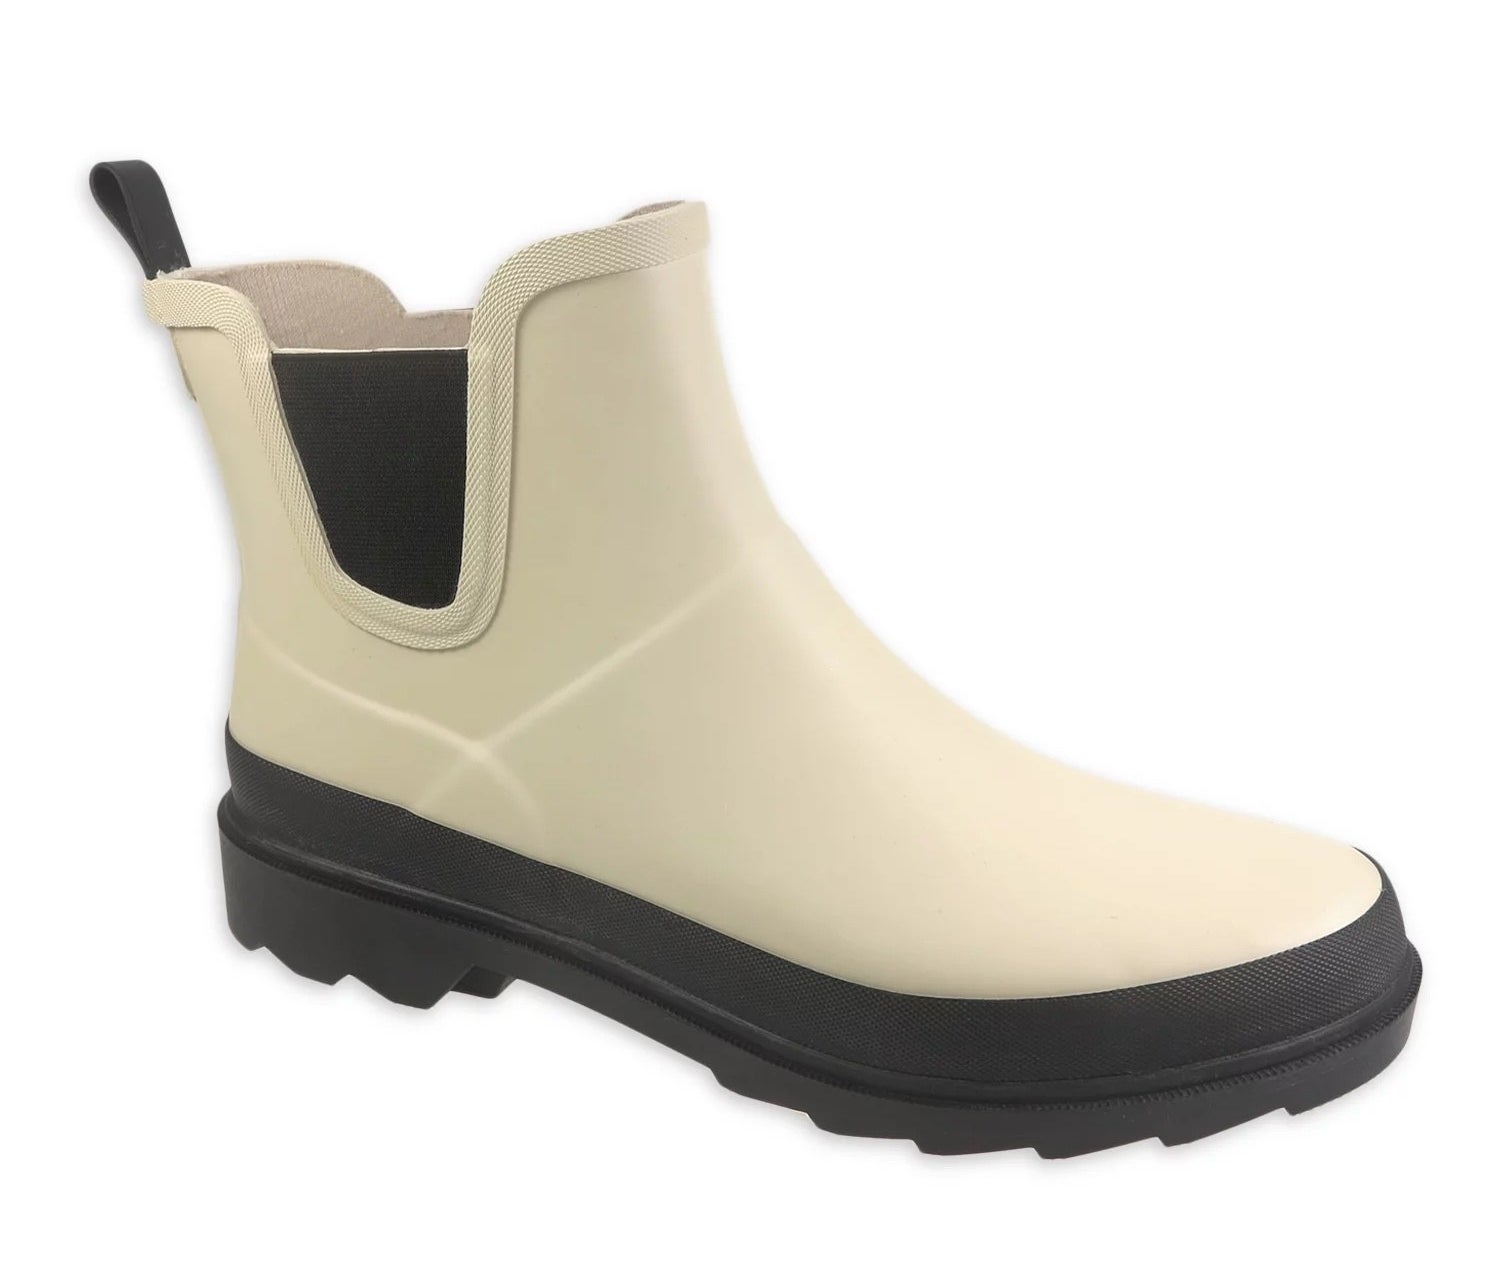 A white and black boot